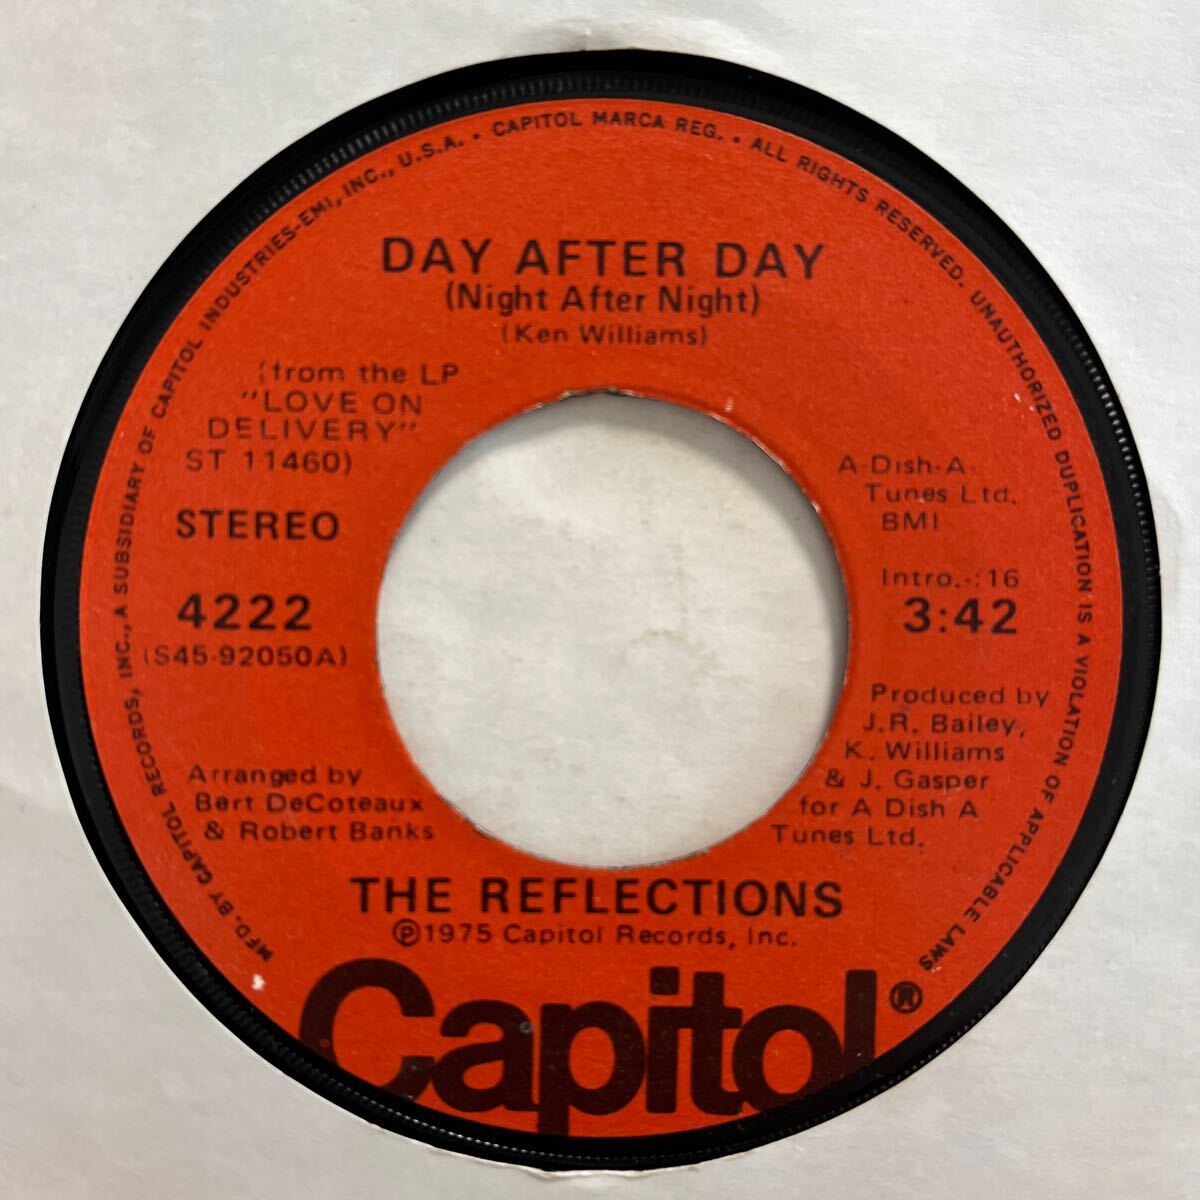 US record 7 -inch THE REFLECTIONS # DAY AFTER DAY / ARE YOU READY